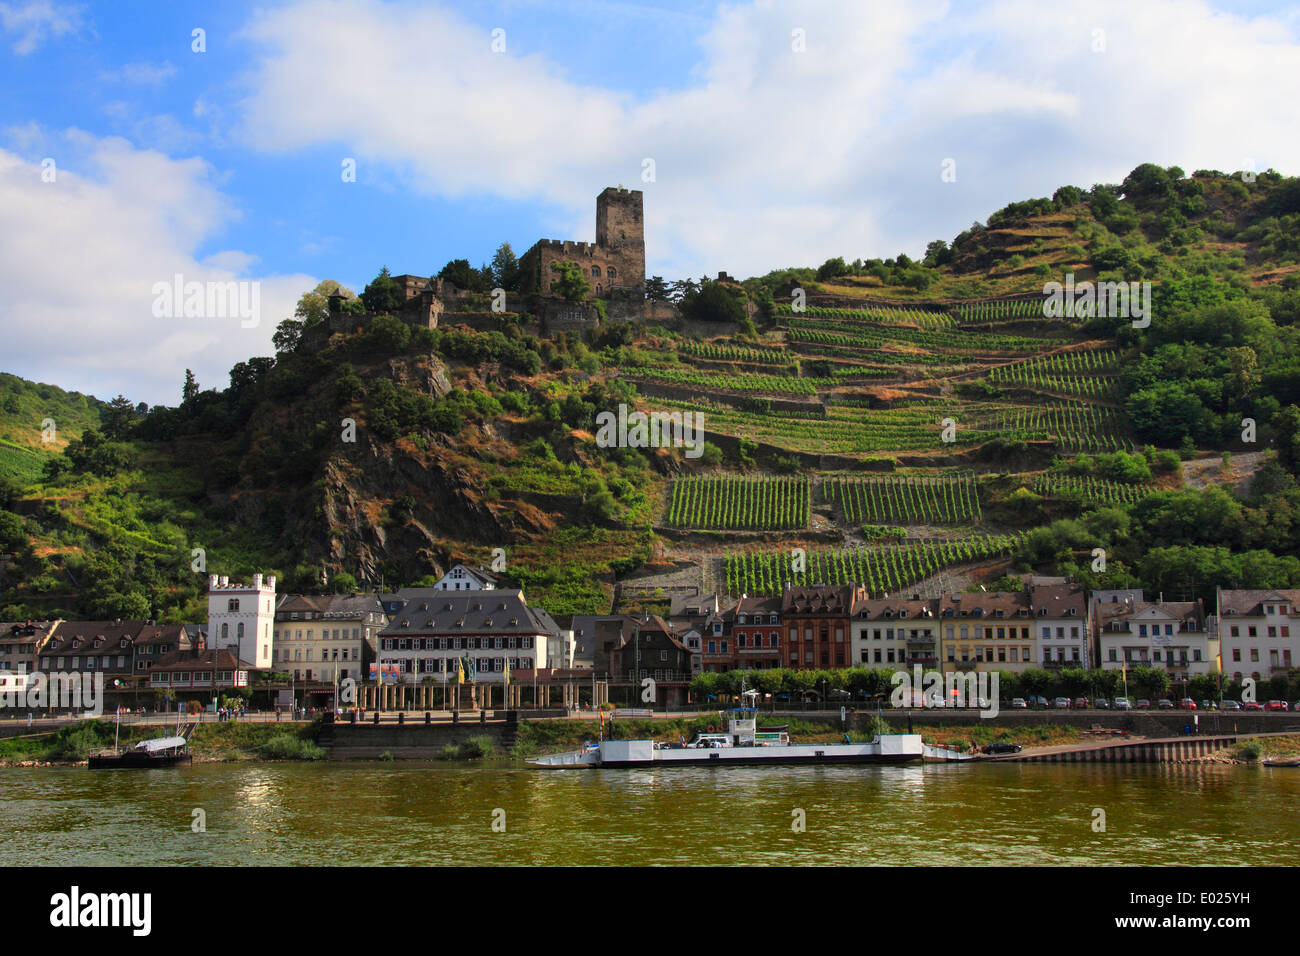 Gutenfels Castle, aka  Caub Castle, sits atop the town of Kaub, Germany Stock Photo